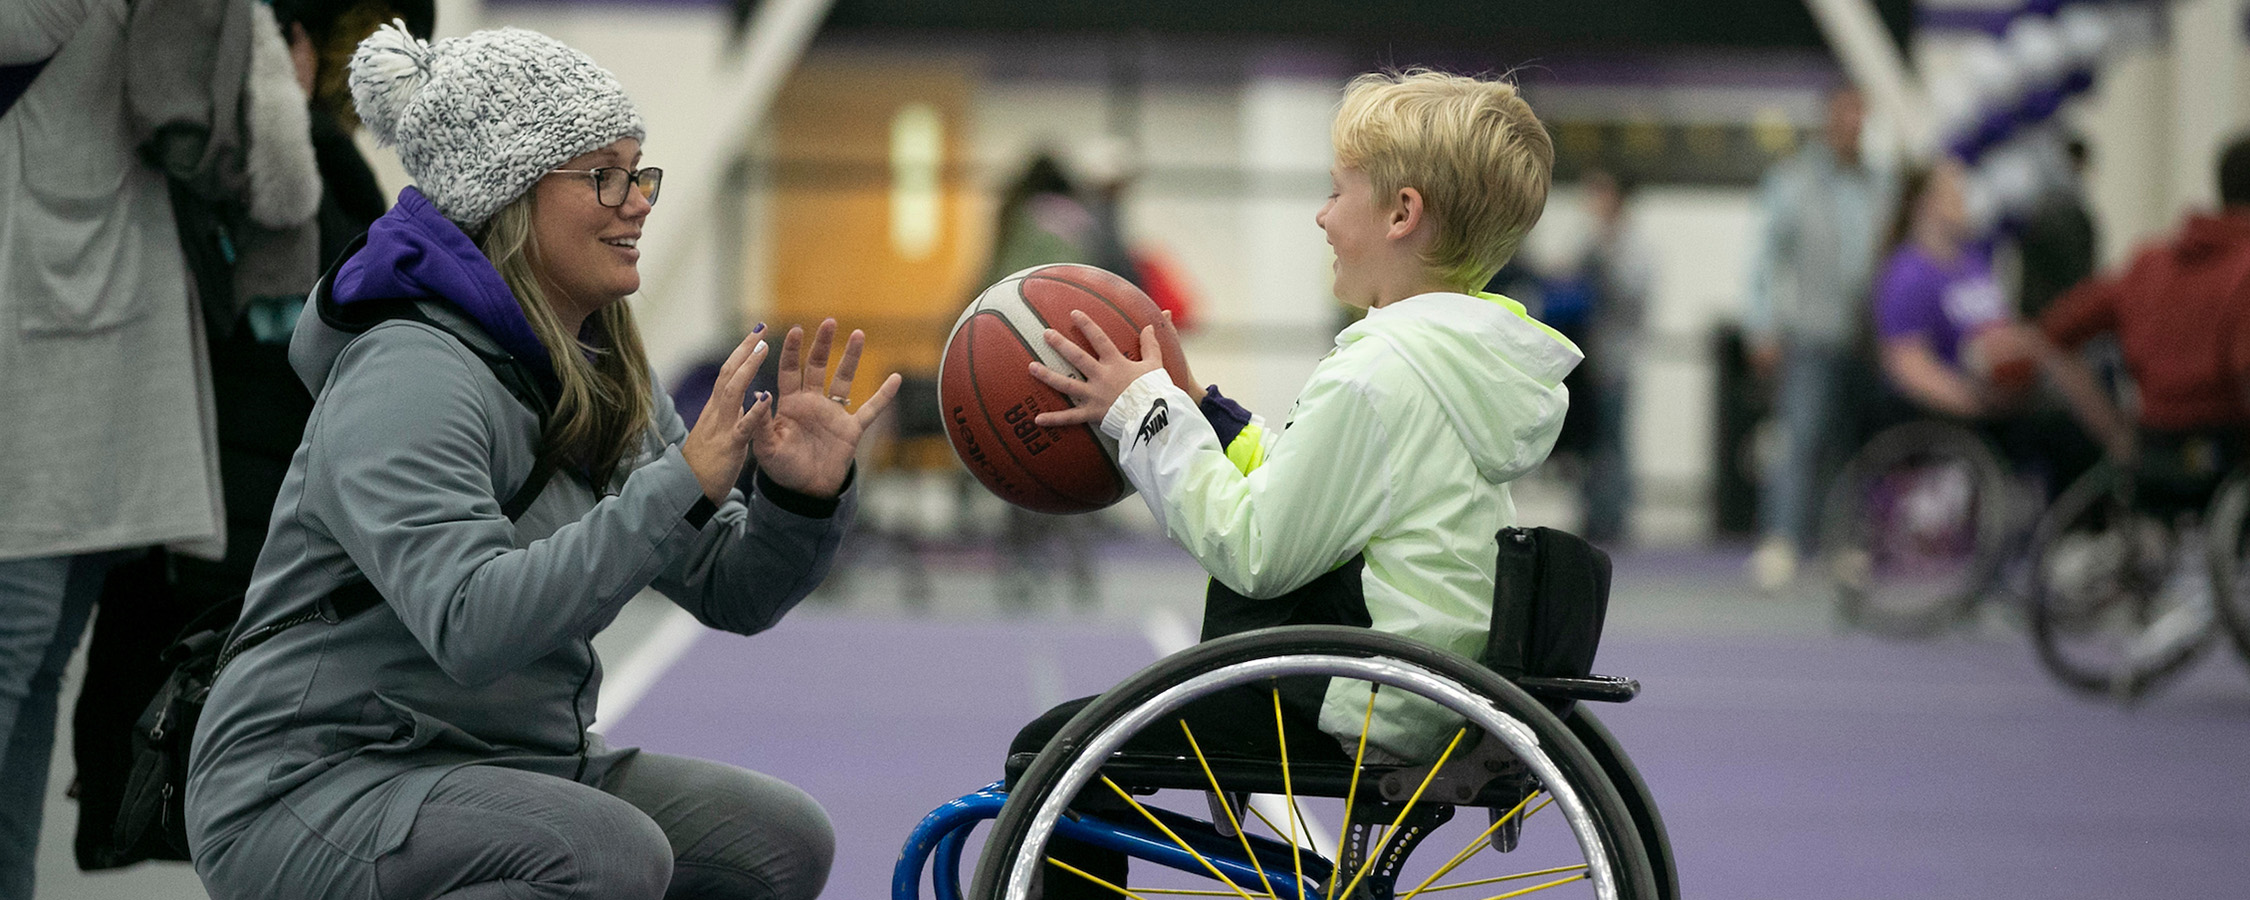 Boy in a wheelchair passing a basketball to a woman crouching in front of him